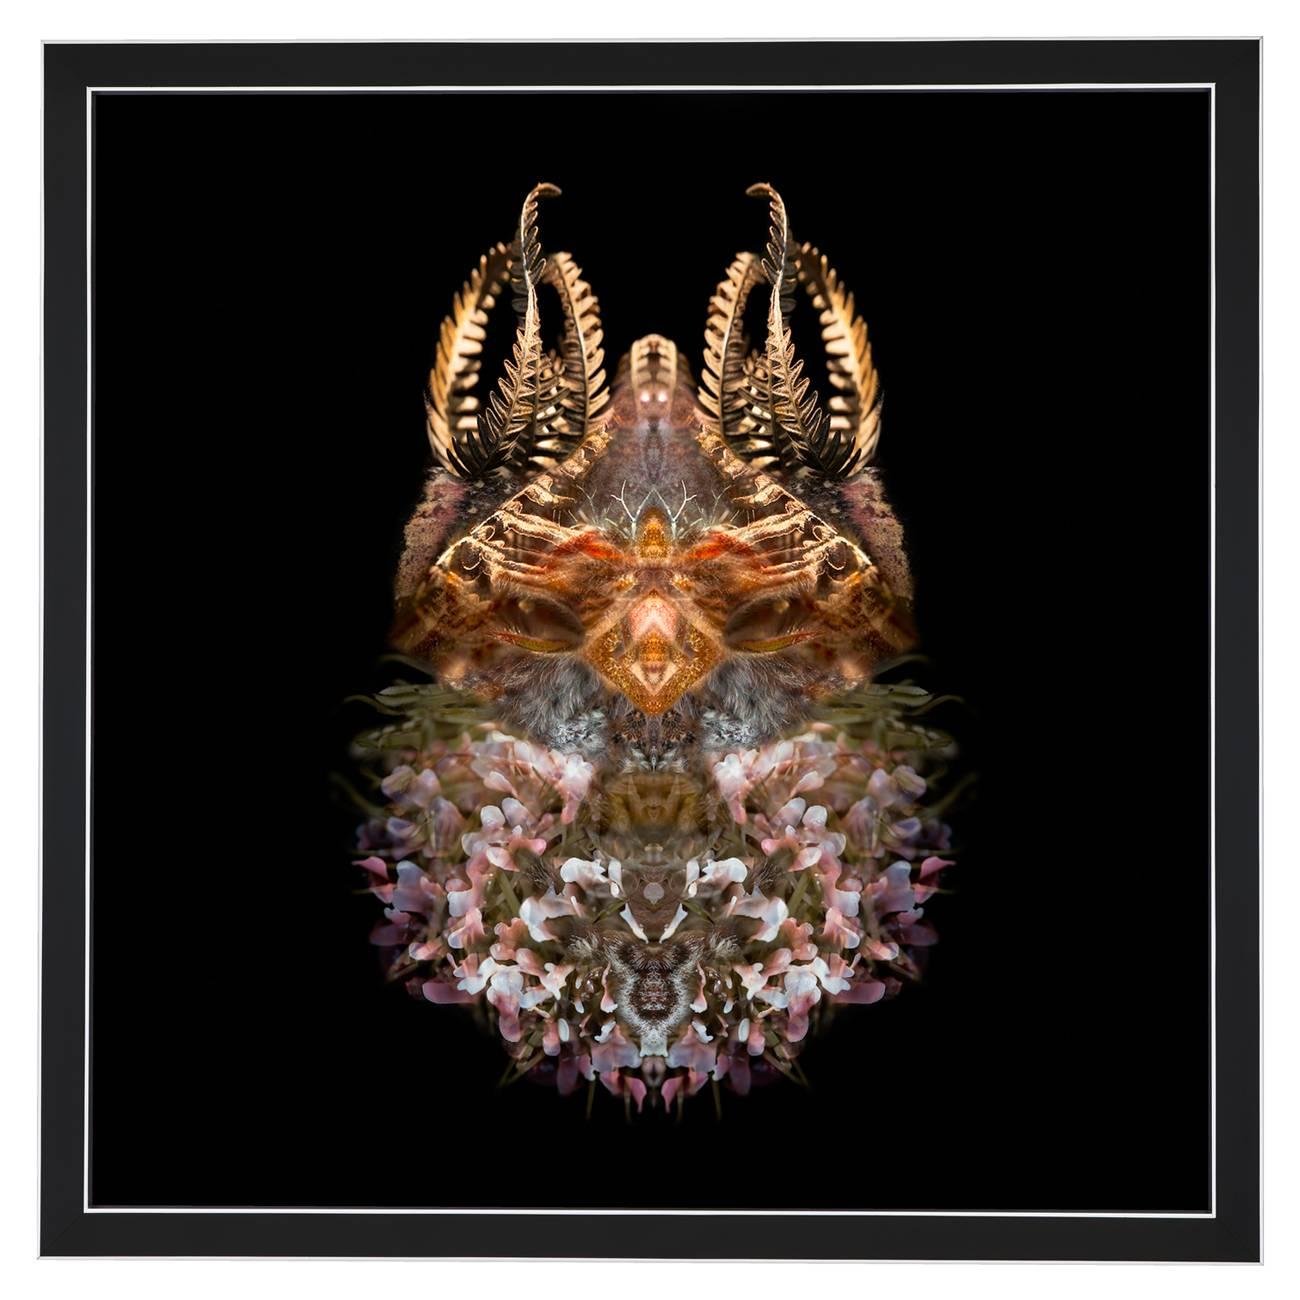 Composition: 
Dilatris Corymbosa (SA plant species), Dried Fern, Usnea Lichen, Emperor Moth wing/body, Pink Seaweed, Yellow pin cushion protea

Limited edition. Each image is uniquely printed directly to 5mm acrylic glass using UV cured pigment inks